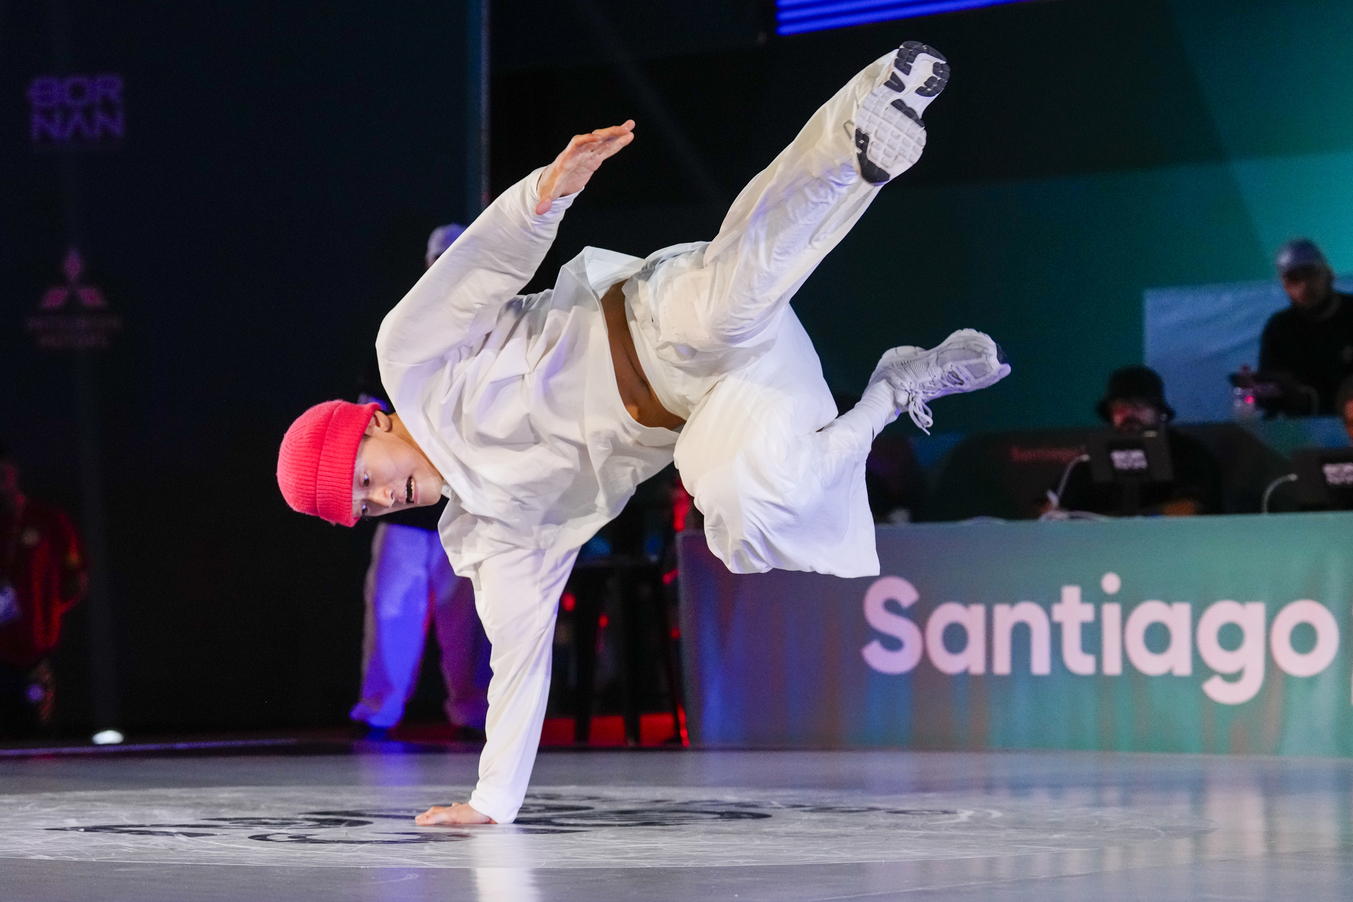 Breakdancer Phil Kim in a white outfit and pink hat performing a break move on the dancefloor at a competition.